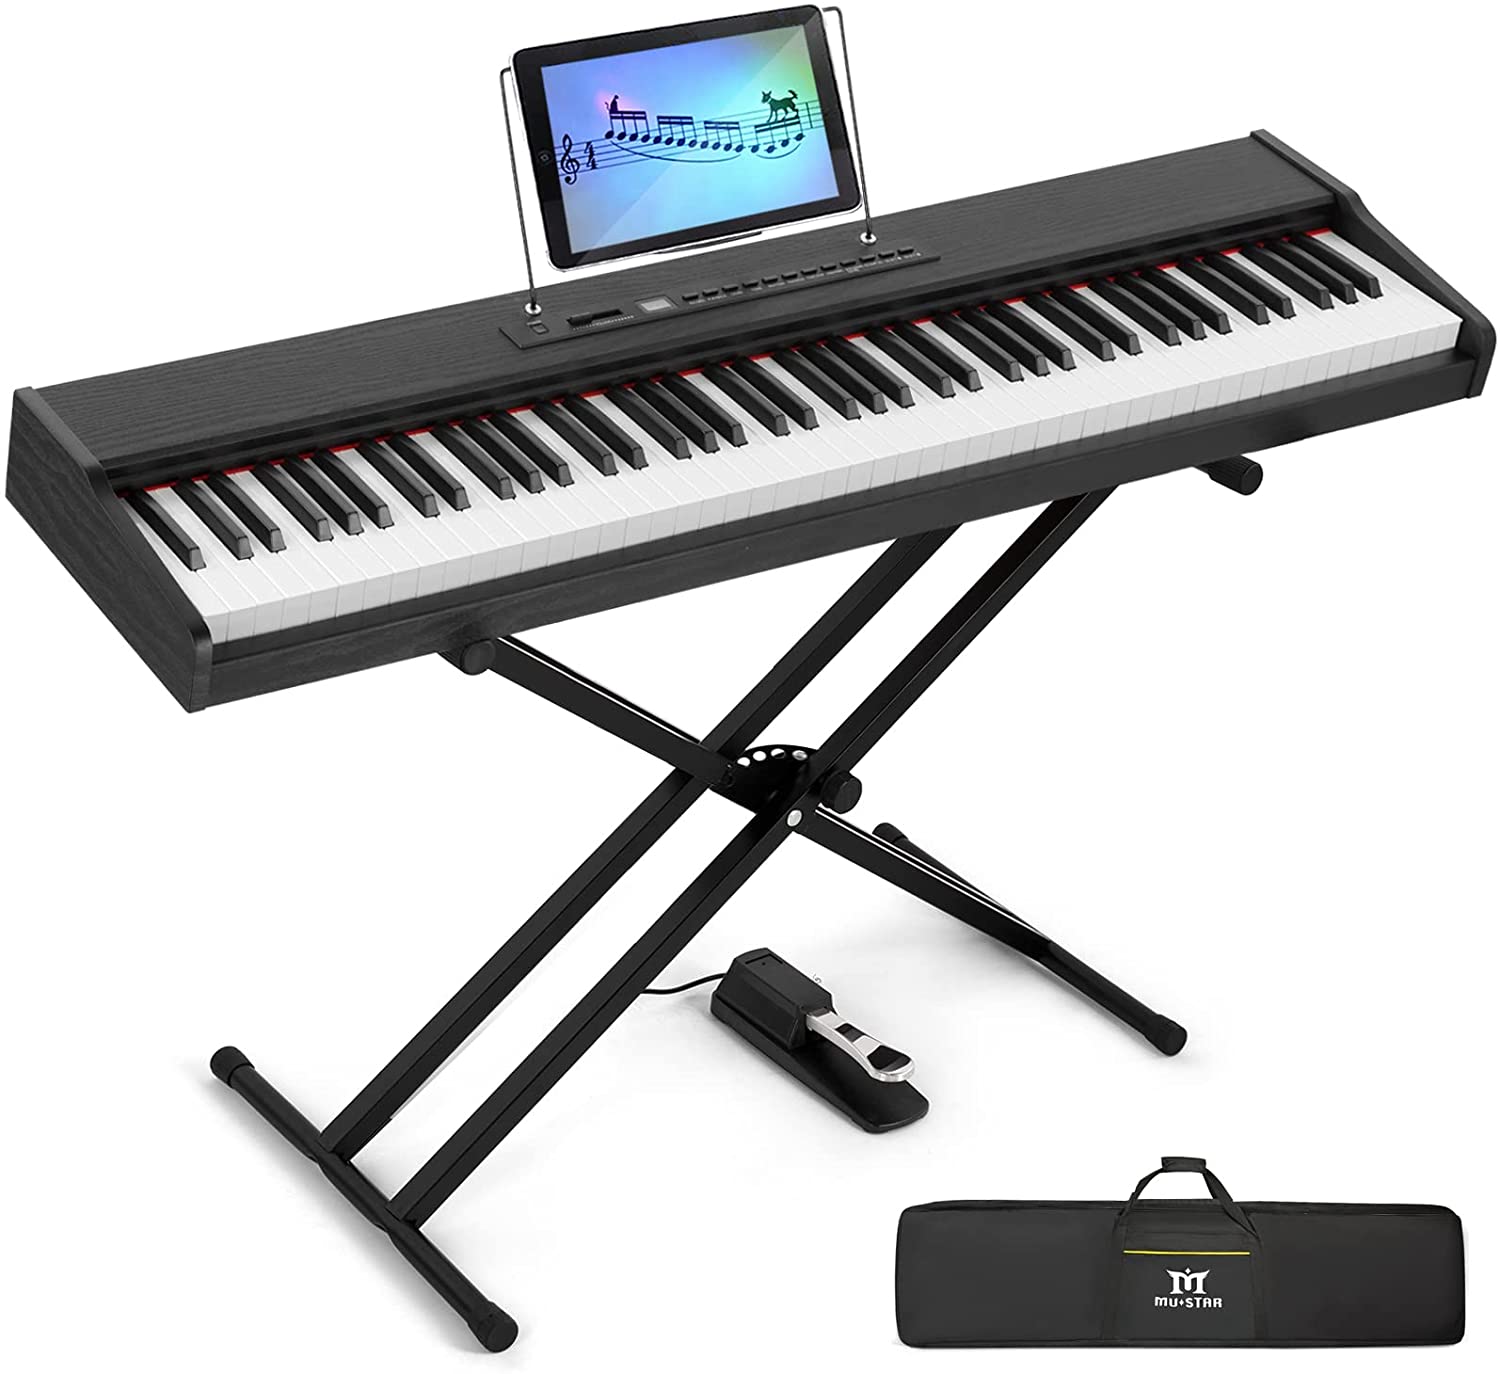 88-Key　Stand,　Keyboard　Weighted　Piano　Mustar　Digital　with　(Black)　Electronic　Bag　Semi　Pedal,